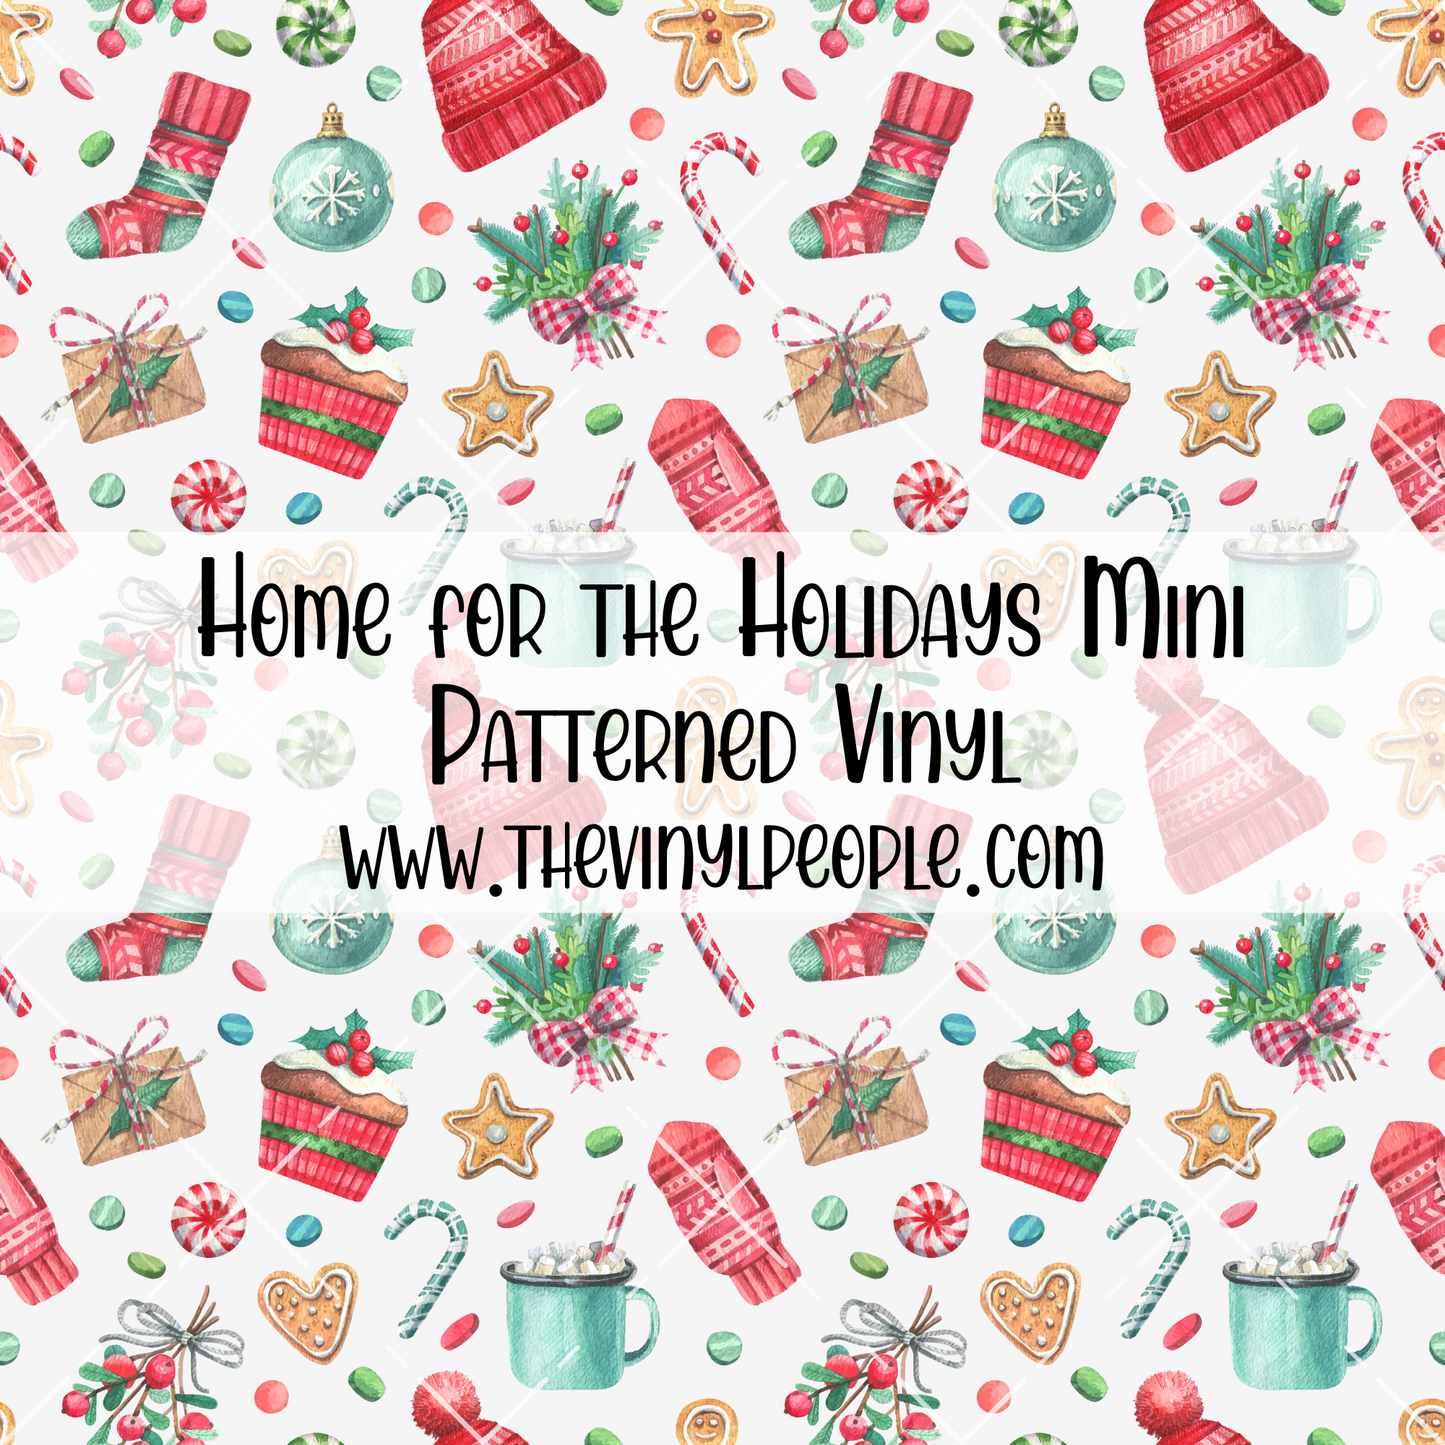 Home for the Holidays Patterned Vinyl